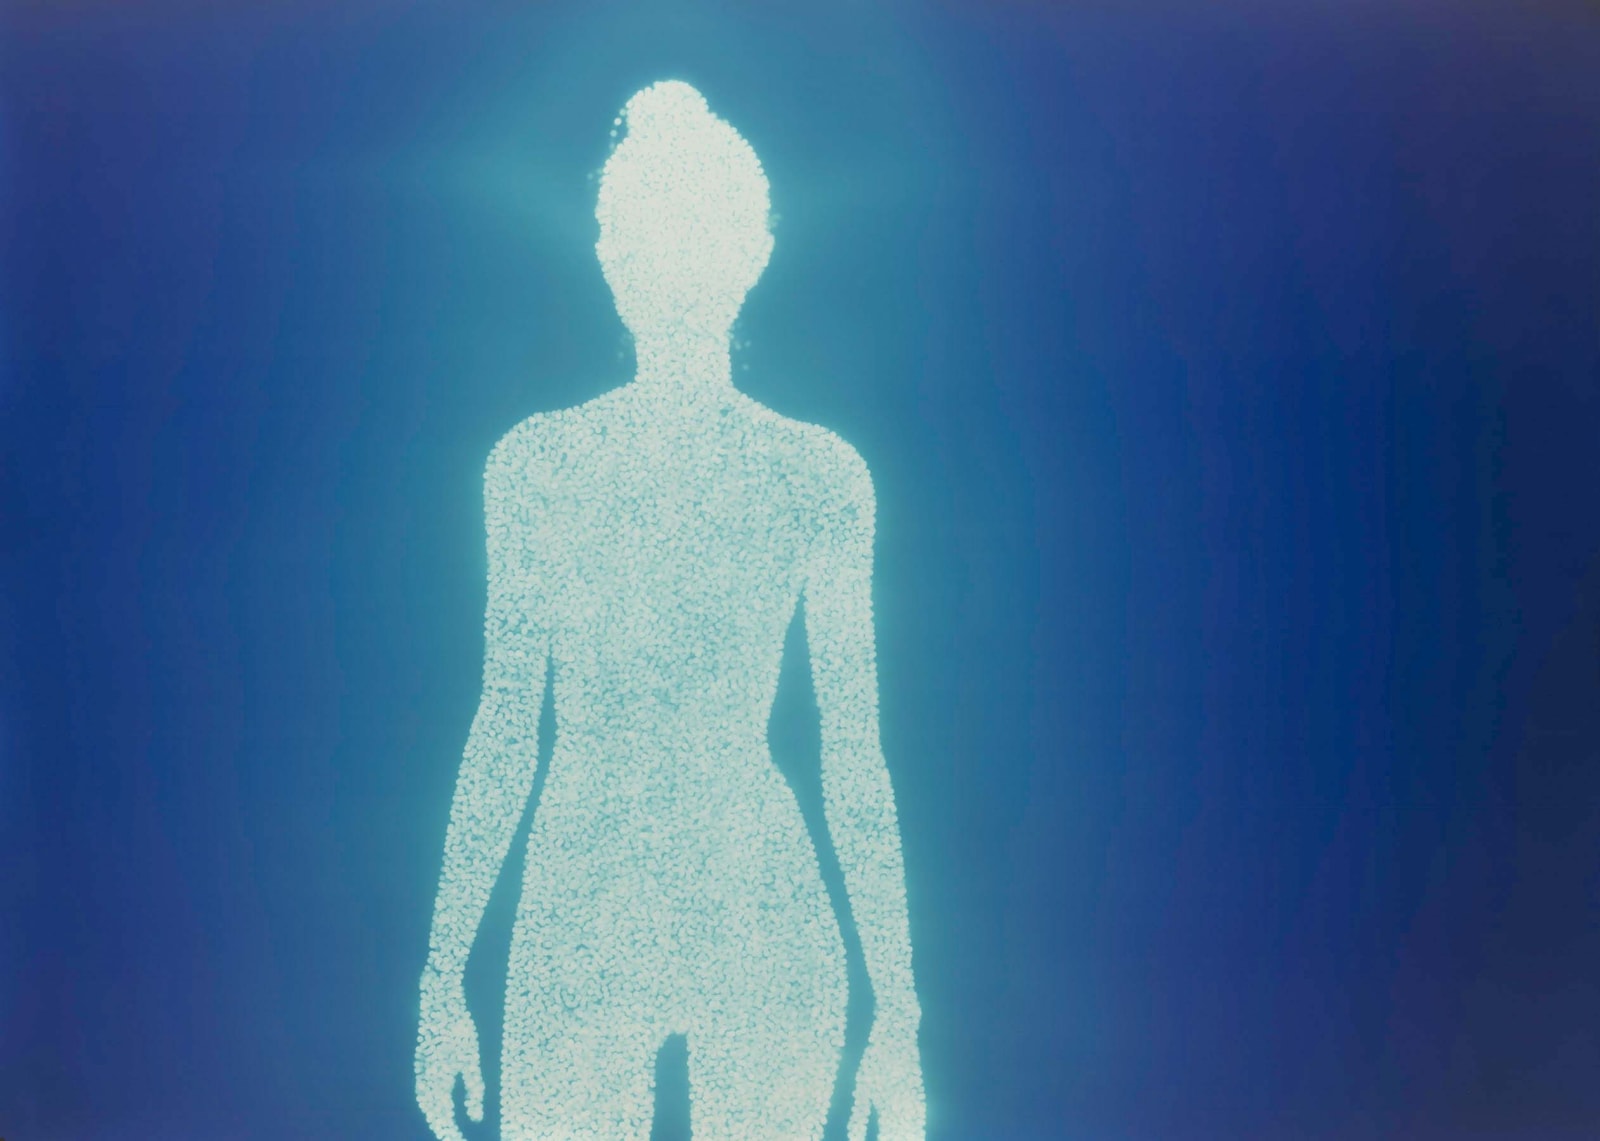 Christopher Bucklow Tetrarch, 3:07, 16th May silhouette of nude woman in light coming through blue background